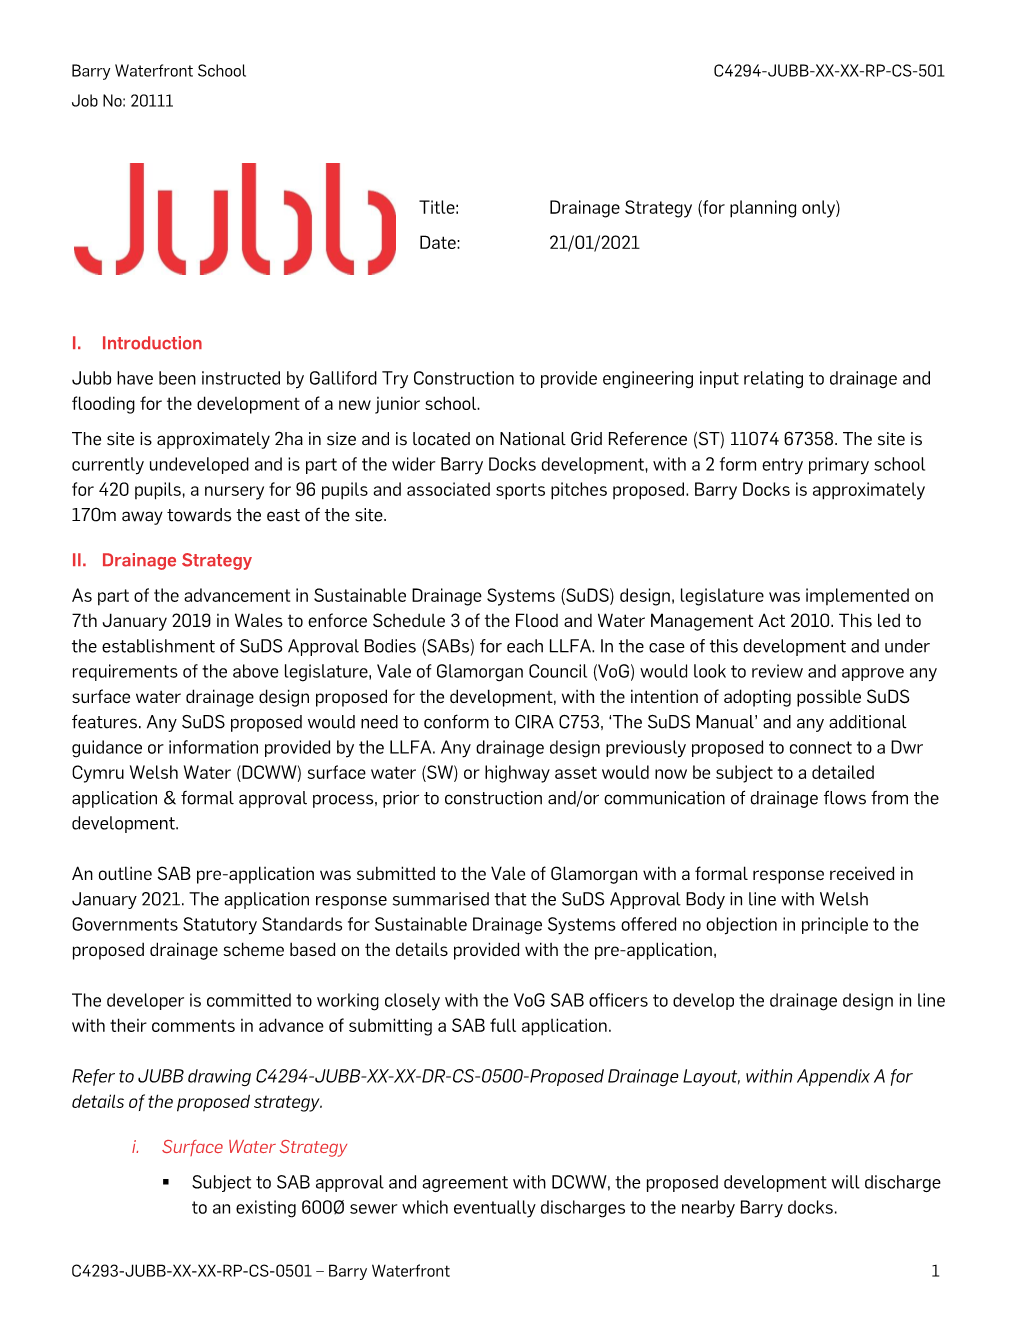 I. Introduction Jubb Have Been Instructed by Galliford Try Construction to Provide Engineering Input Relating to Drainage and Fl